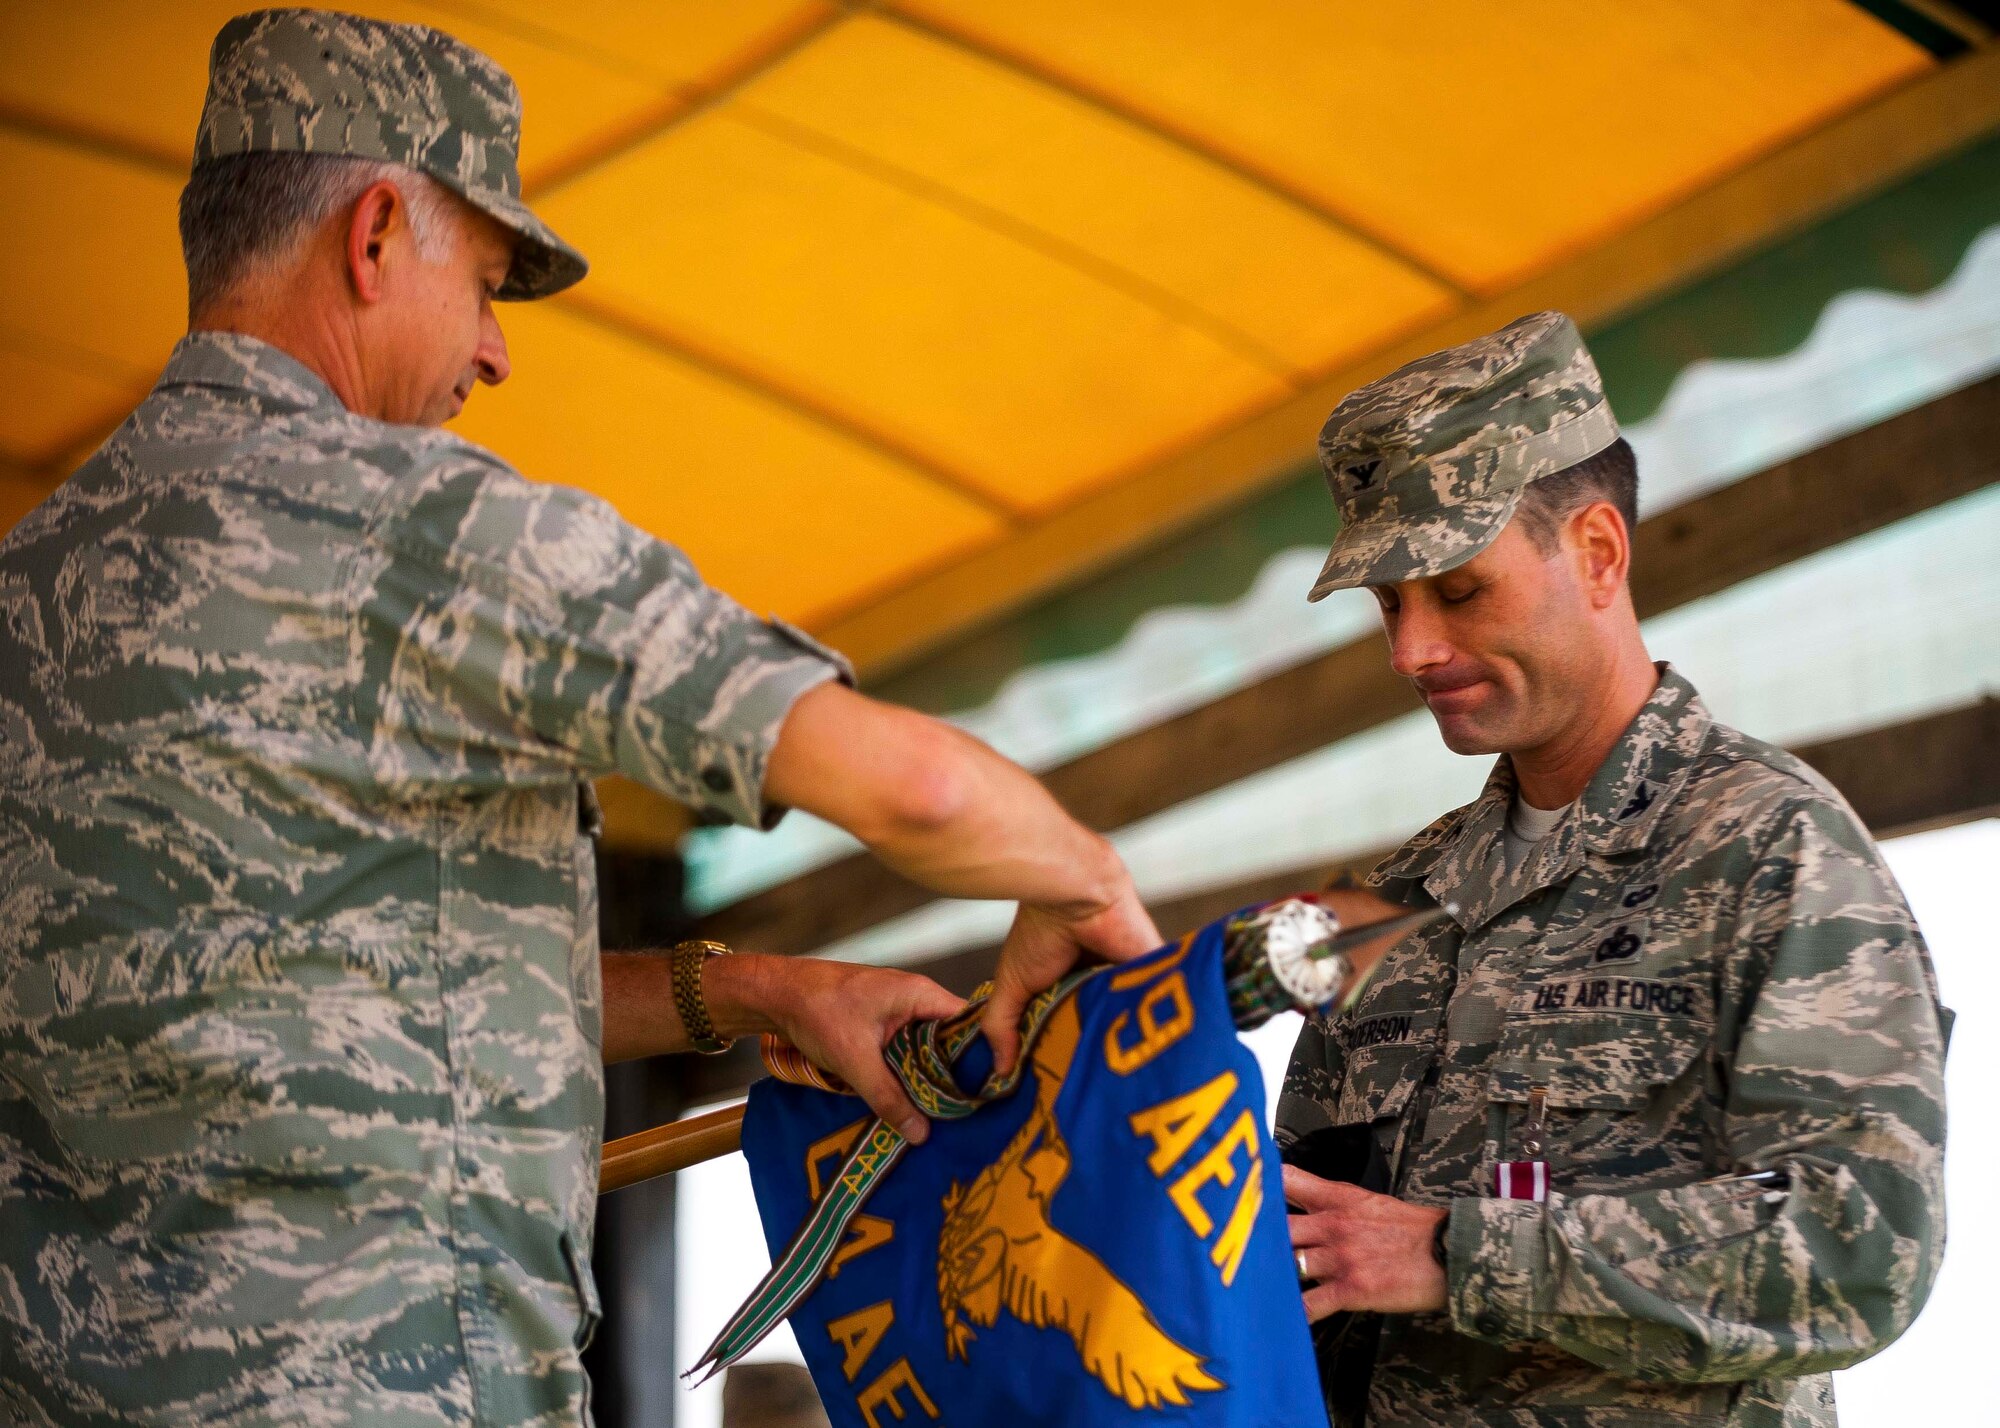 U.S. Air Force Brig. Gen. Roger H. Watkins, 379th Air Expeditionary Wing commander, and Col. Gregory Anderson, 64th Air Expeditionary Group commander, roll the 64th AEG guidon during an deactivation ceremony at an undisclosed location in Southwest Asia, May 1, 2014. The 64th AEG was activated in September 2005, and was deactivated in part of a downsizing in the region. (U.S. Air Force photo by Master Sgt. Jason Kauffung)